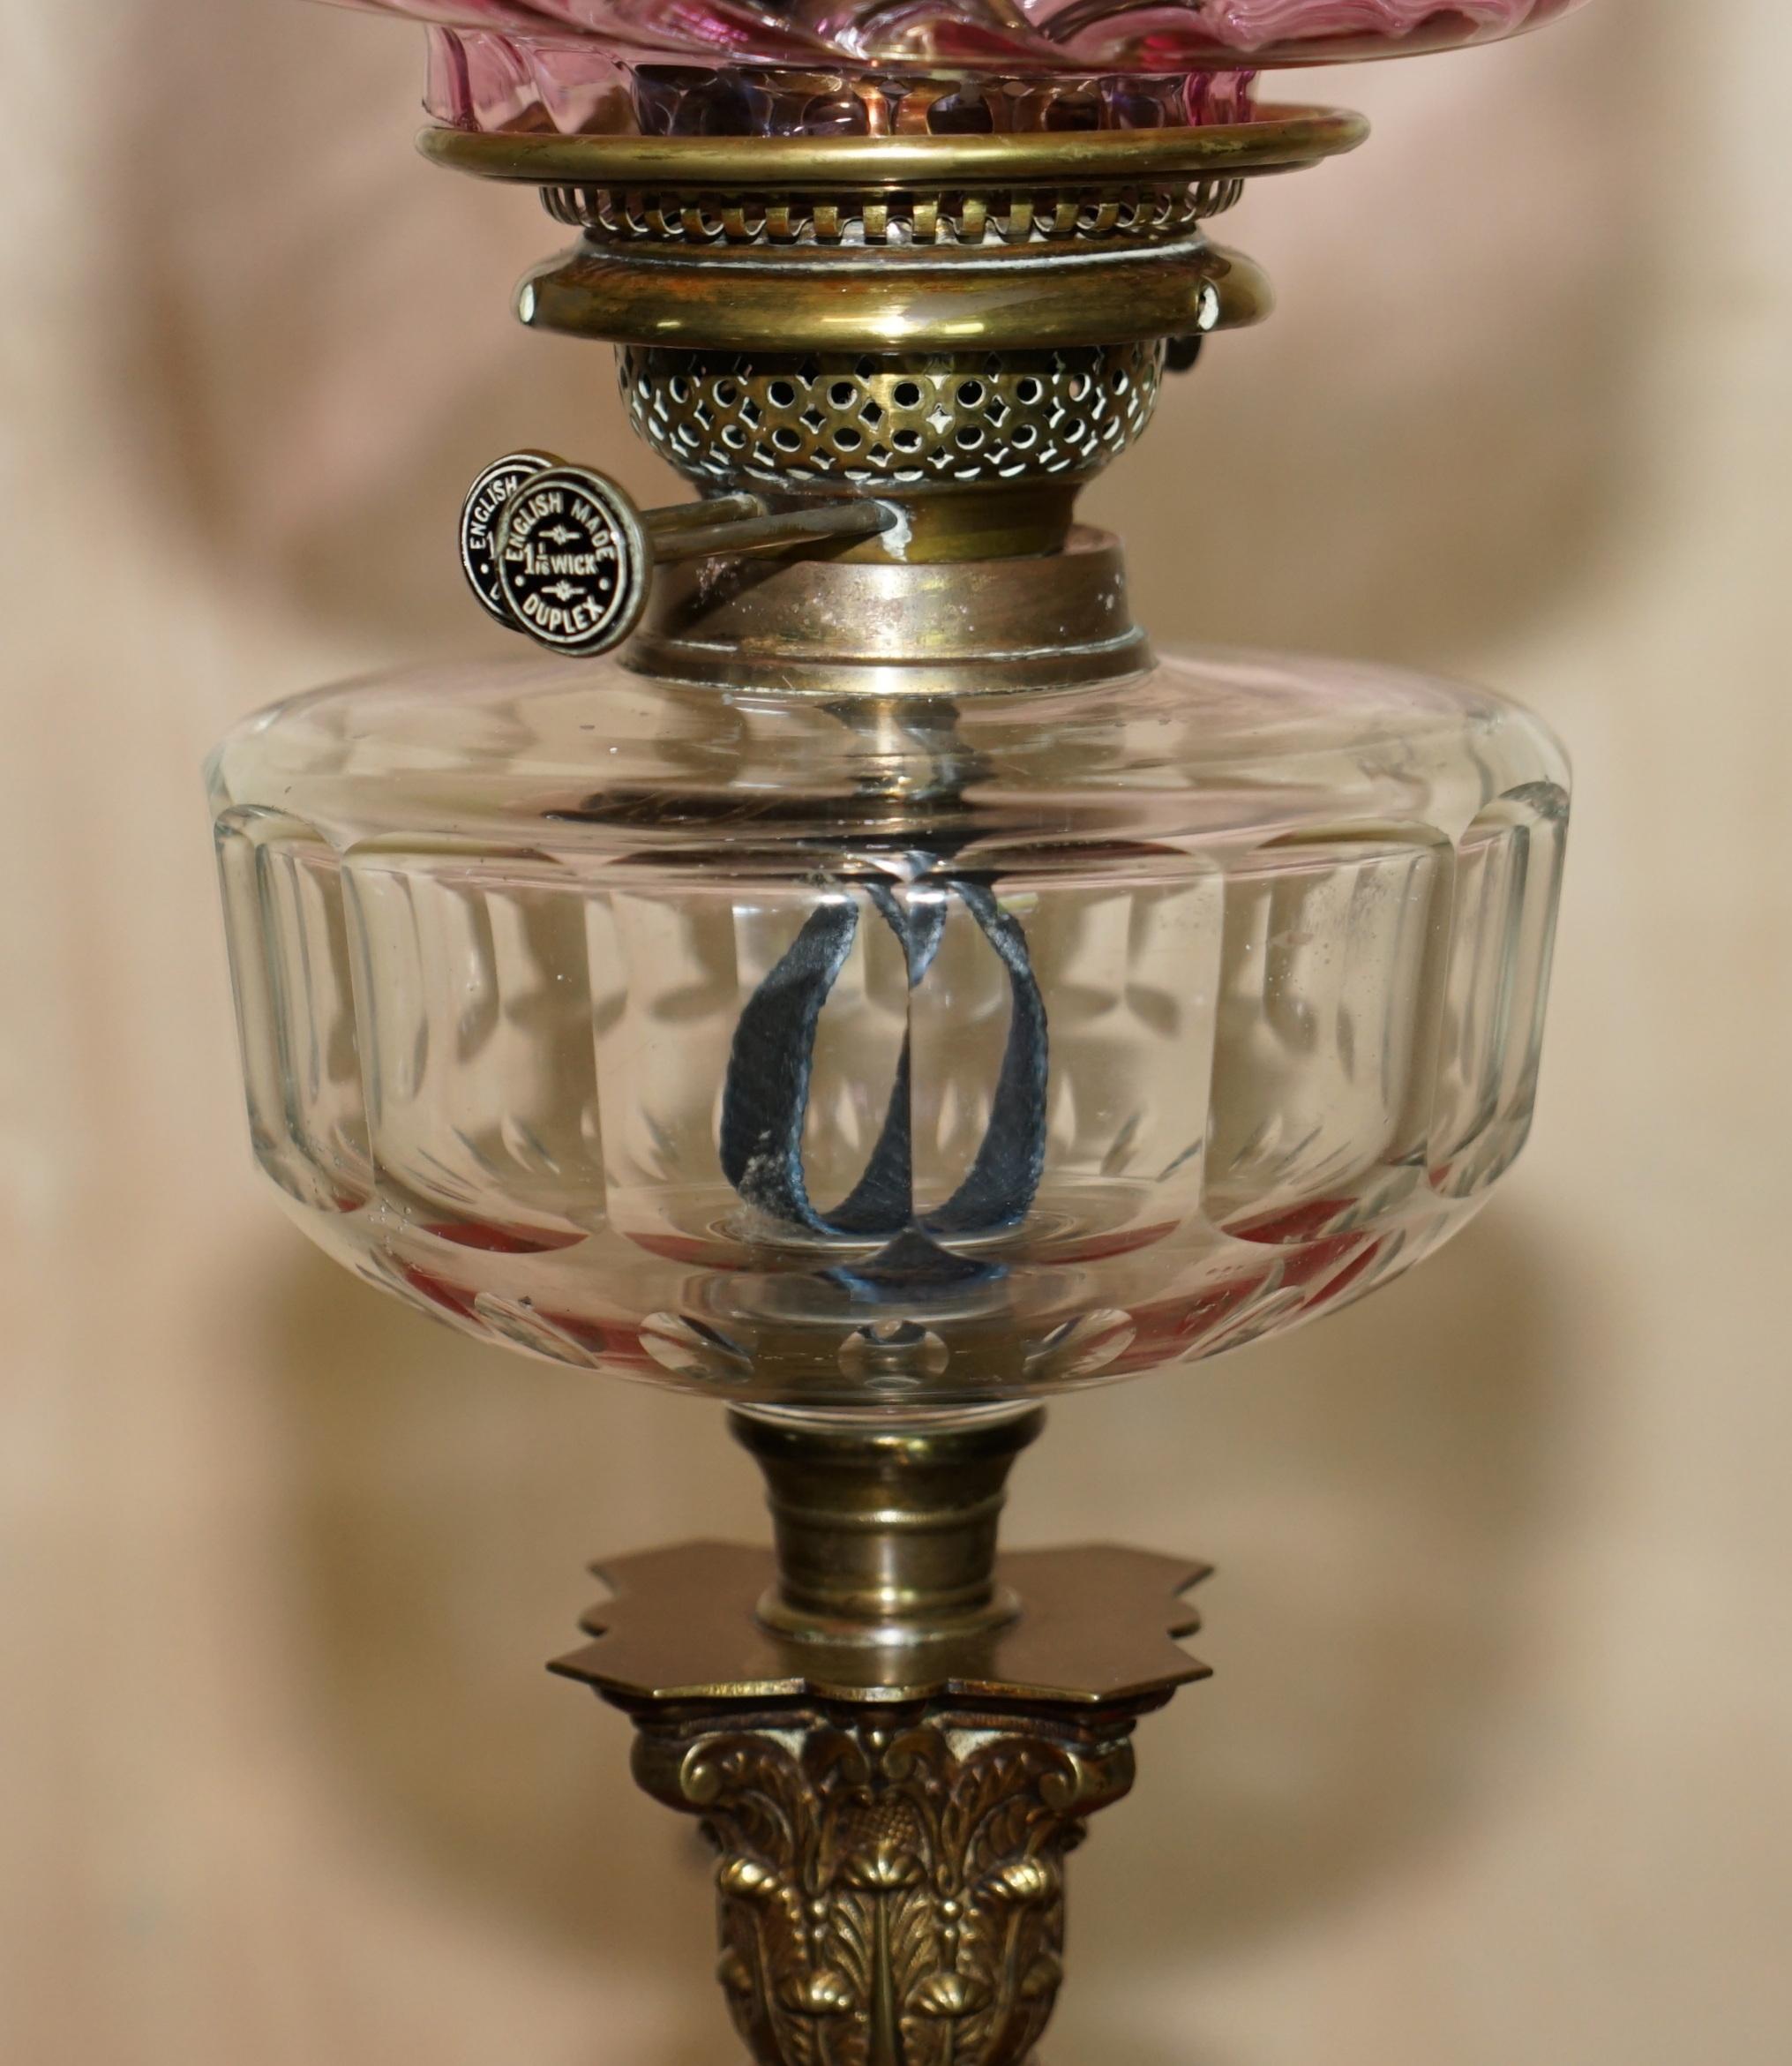 Hand-Crafted Anitique Spiral Corinthian Pillar Base Victorian Oil Lamp Original Ruby Glass For Sale